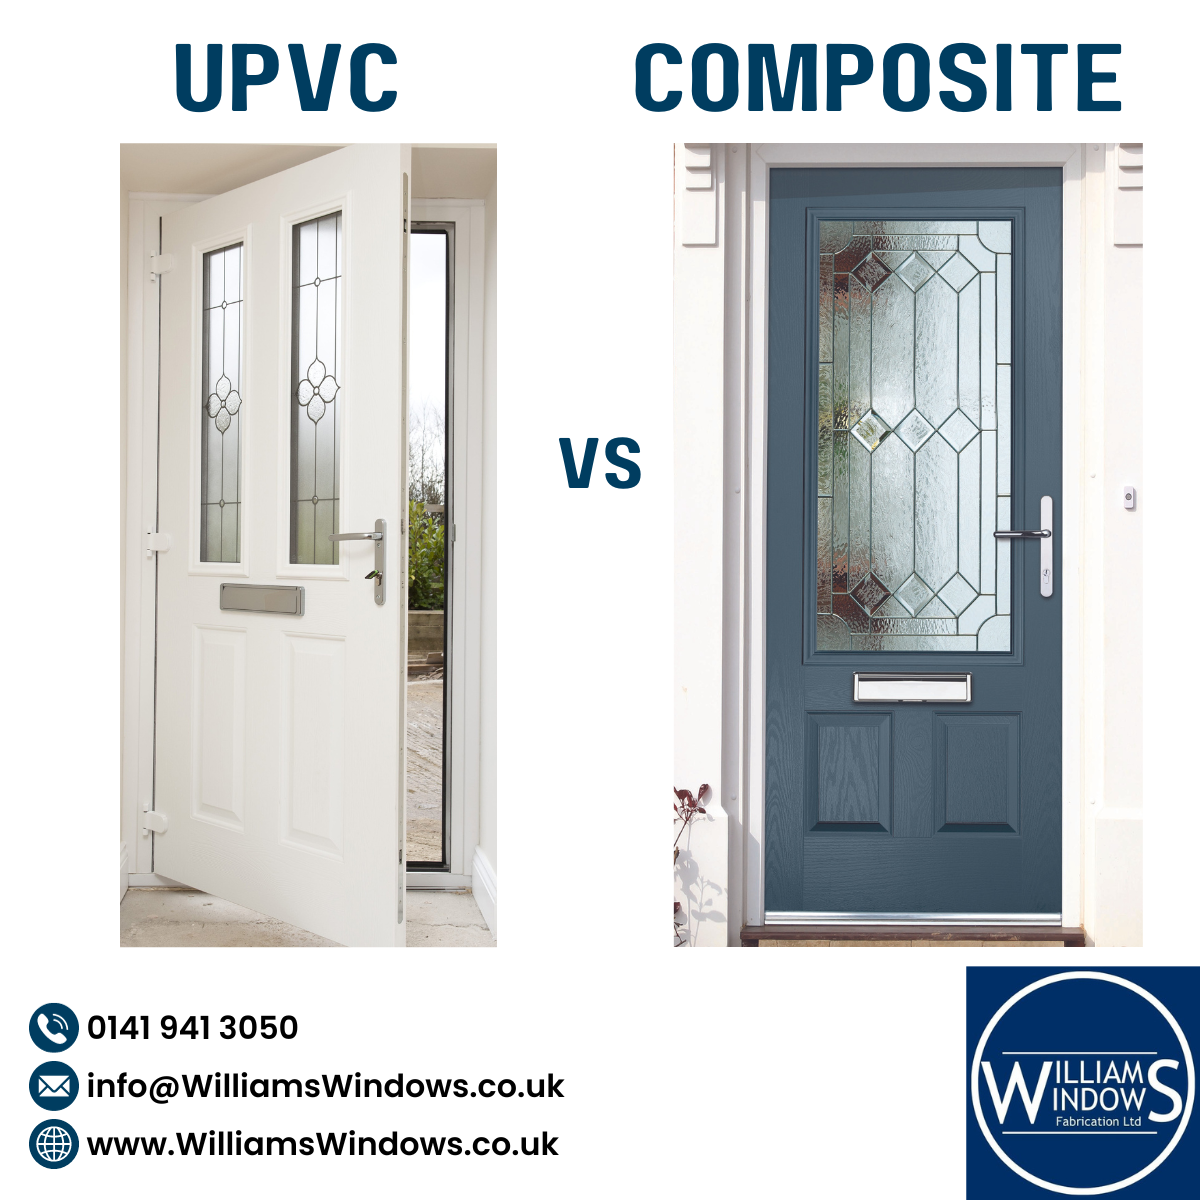 Pros and cons of UPVC and Composite doors